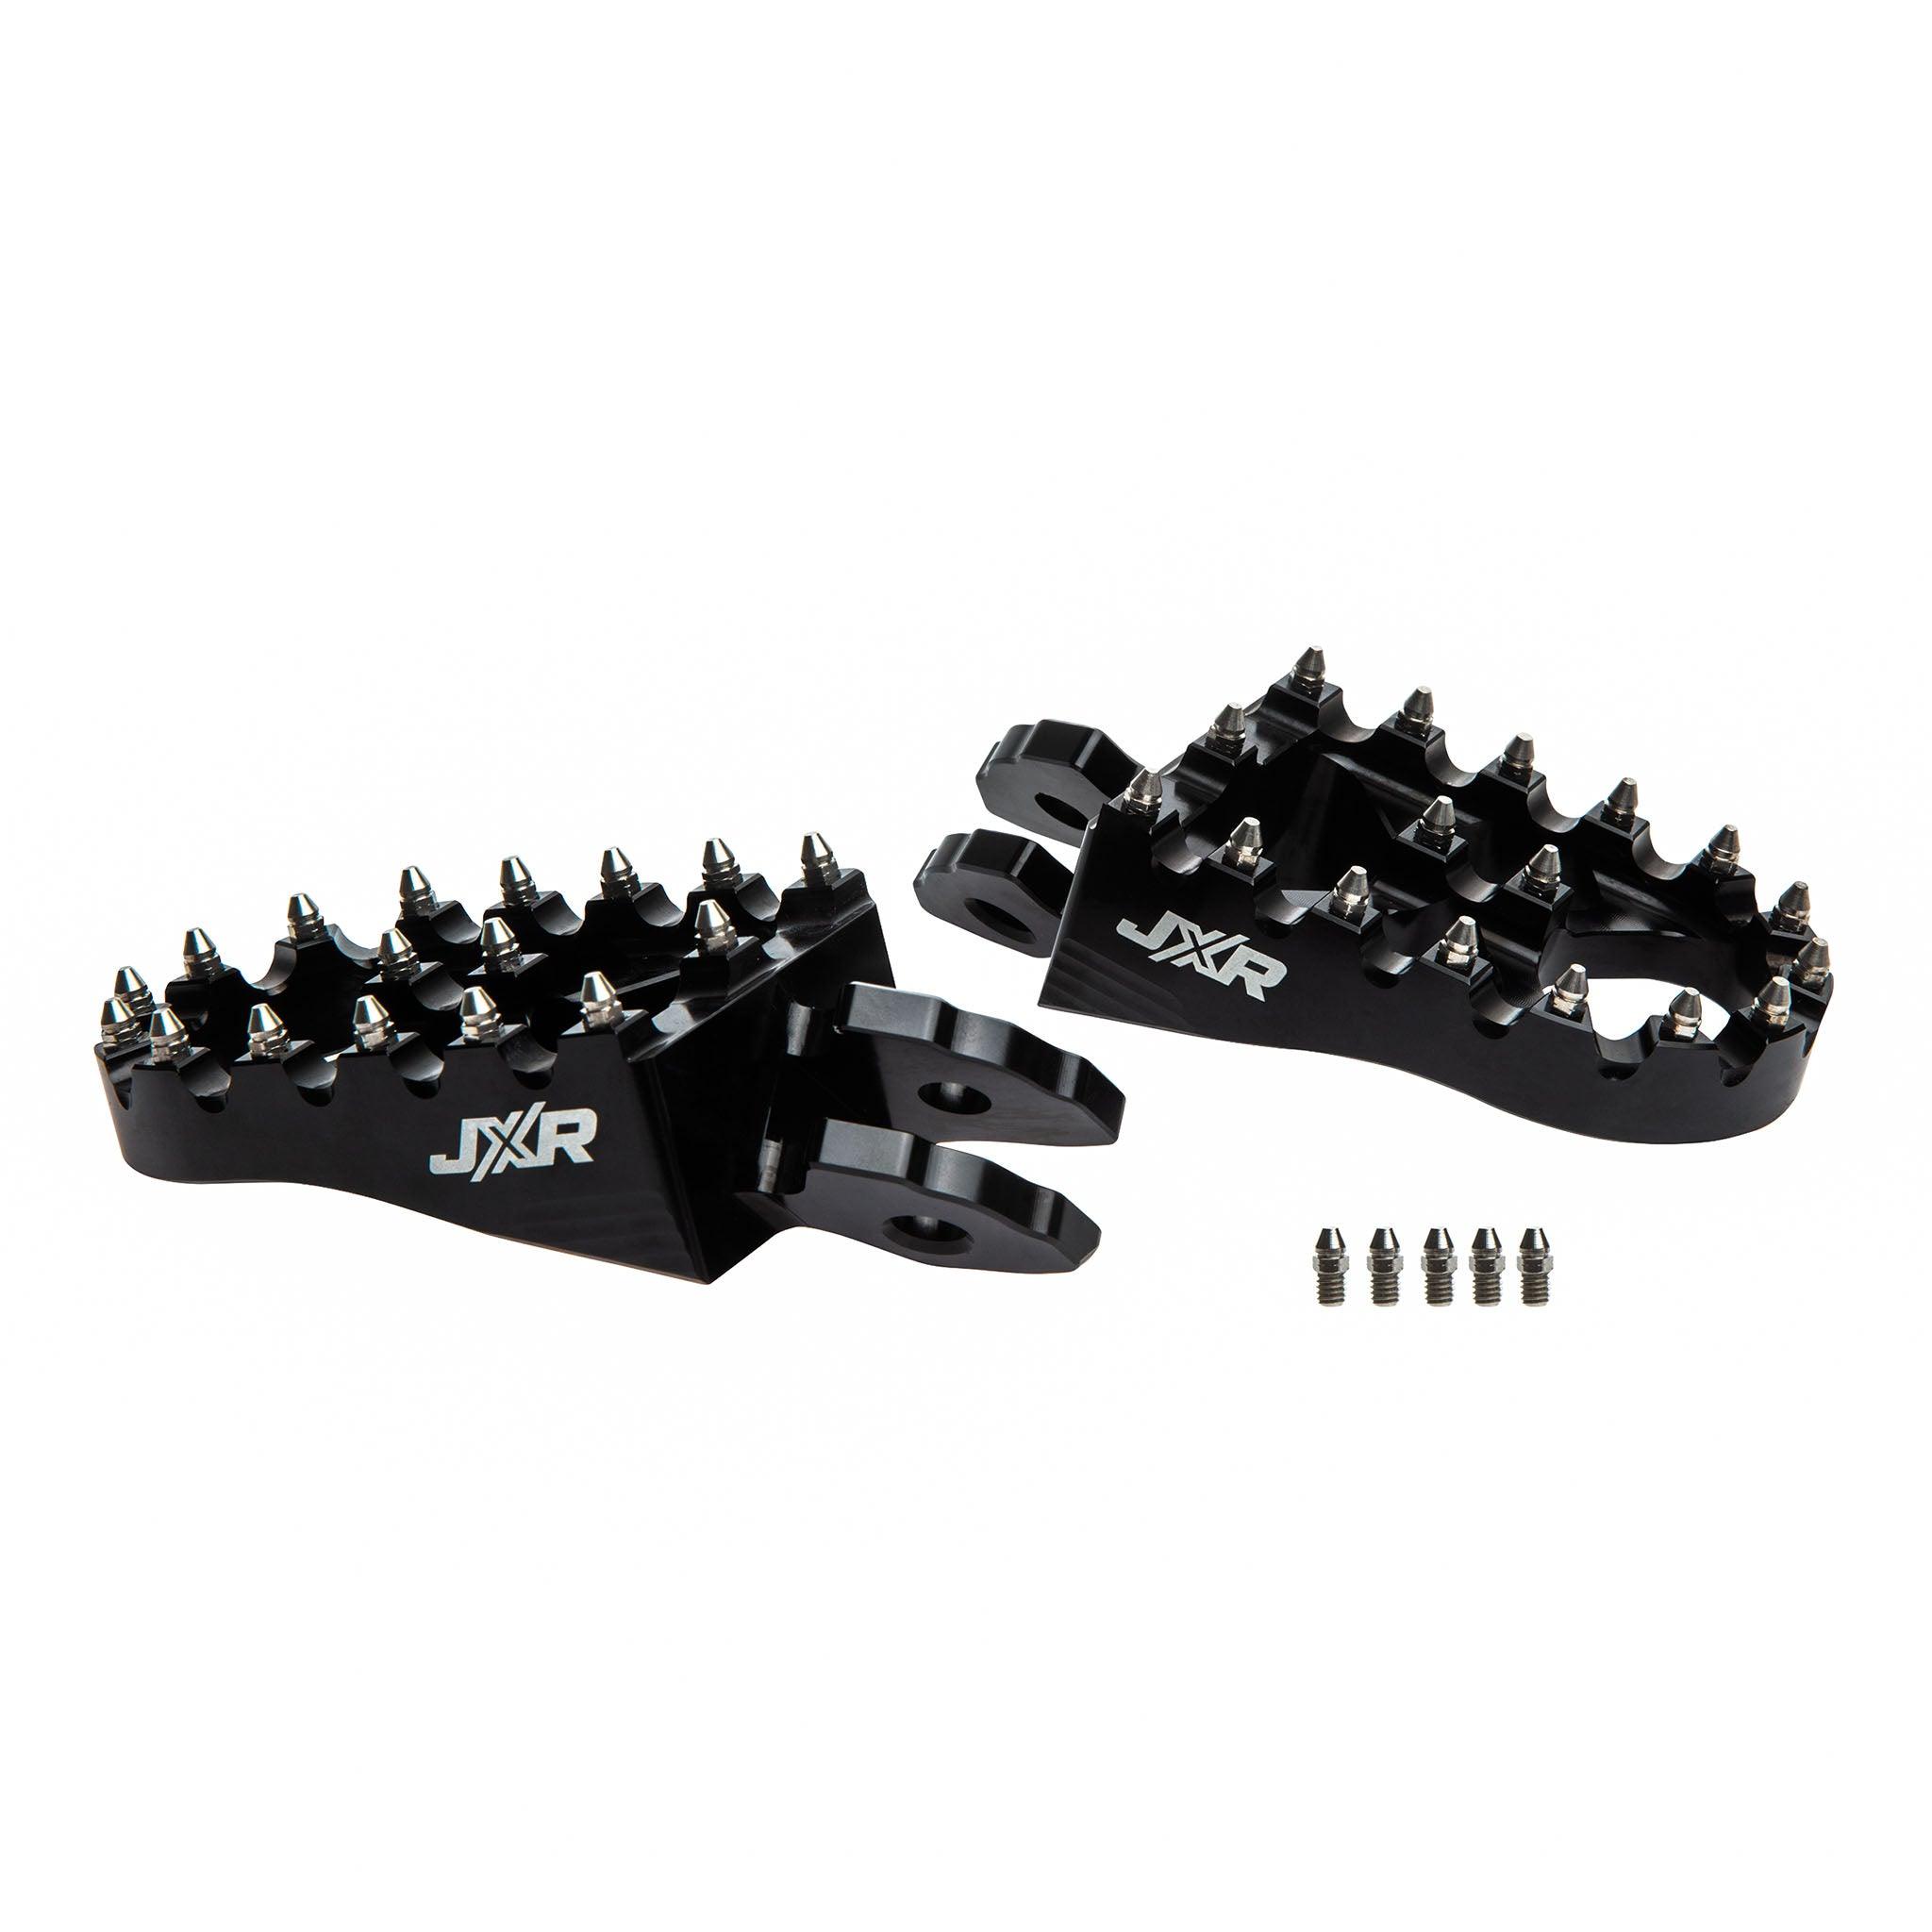 Footpegs for Surron Light Bee anodized black